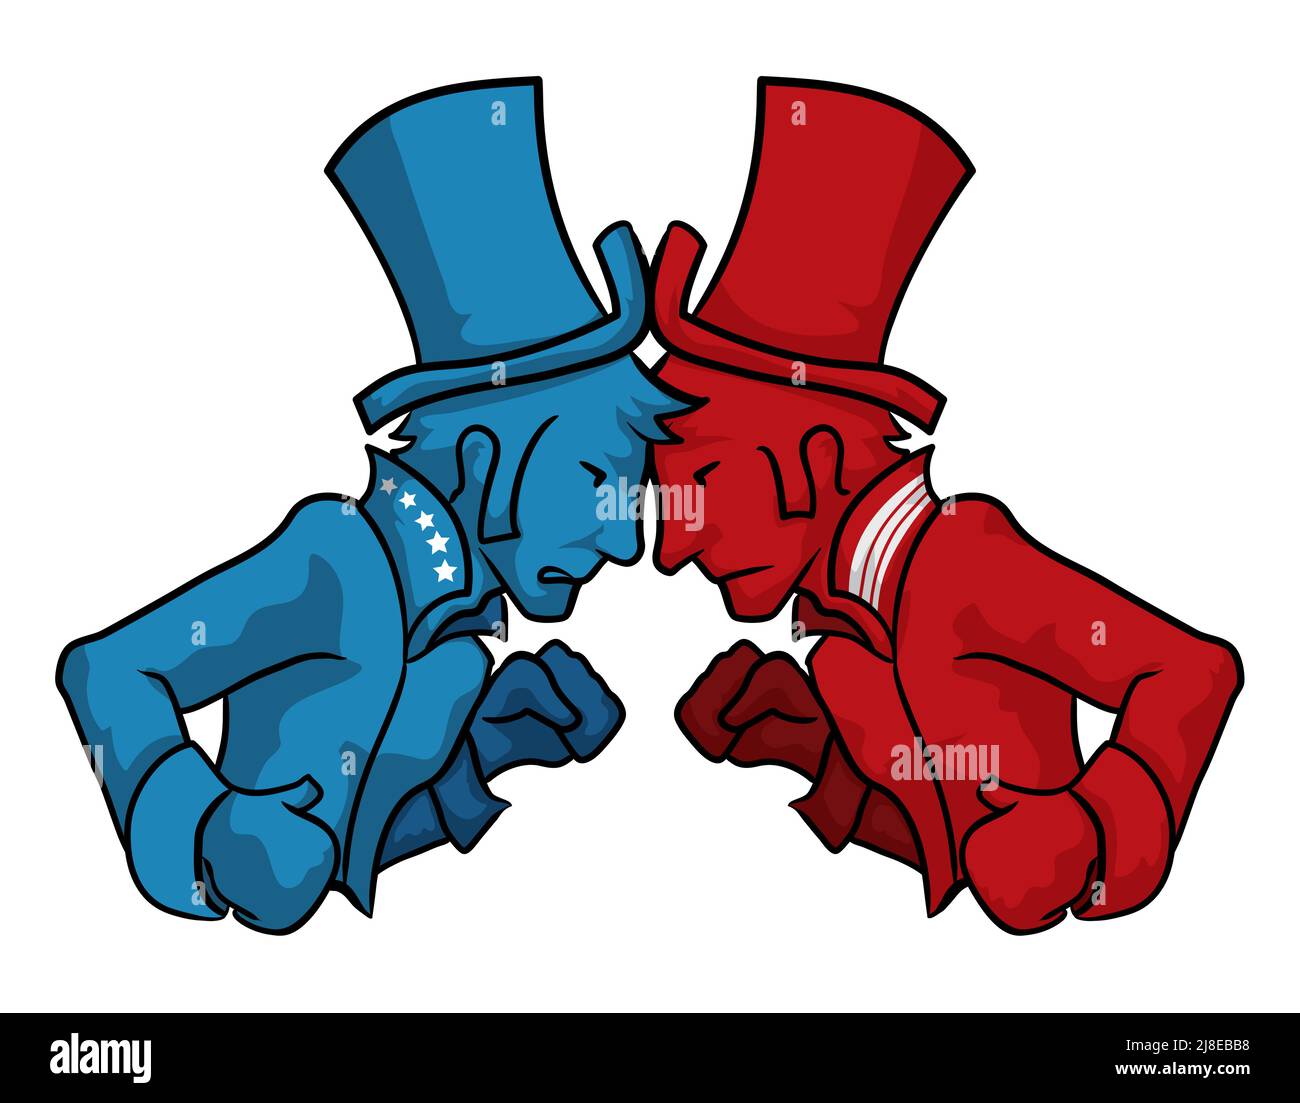 Blue and red gentleman contenders gazing each other, with top hats, traditional garment and boxing gloves ready to fight during American electoral sea Stock Vector